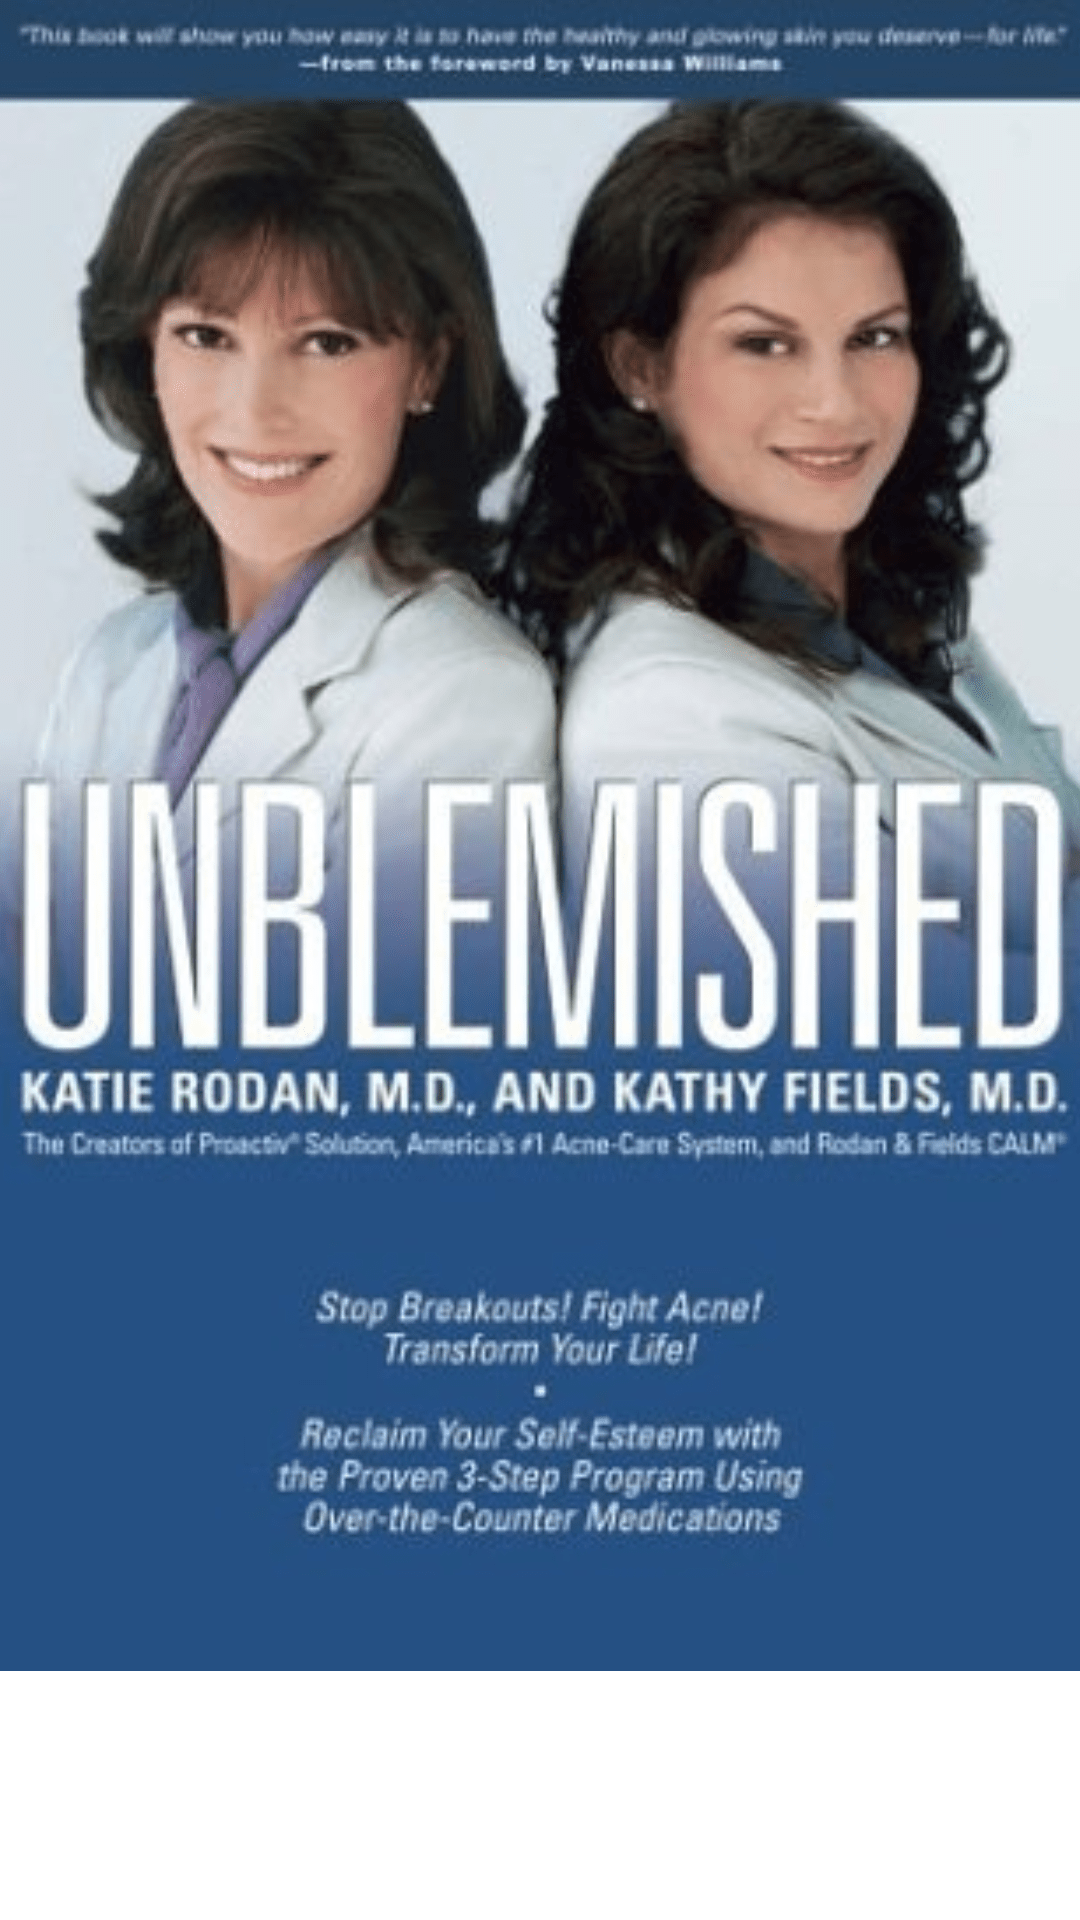 Unblemished: Stop Breakouts! Fight Acne! Transform Your Life!